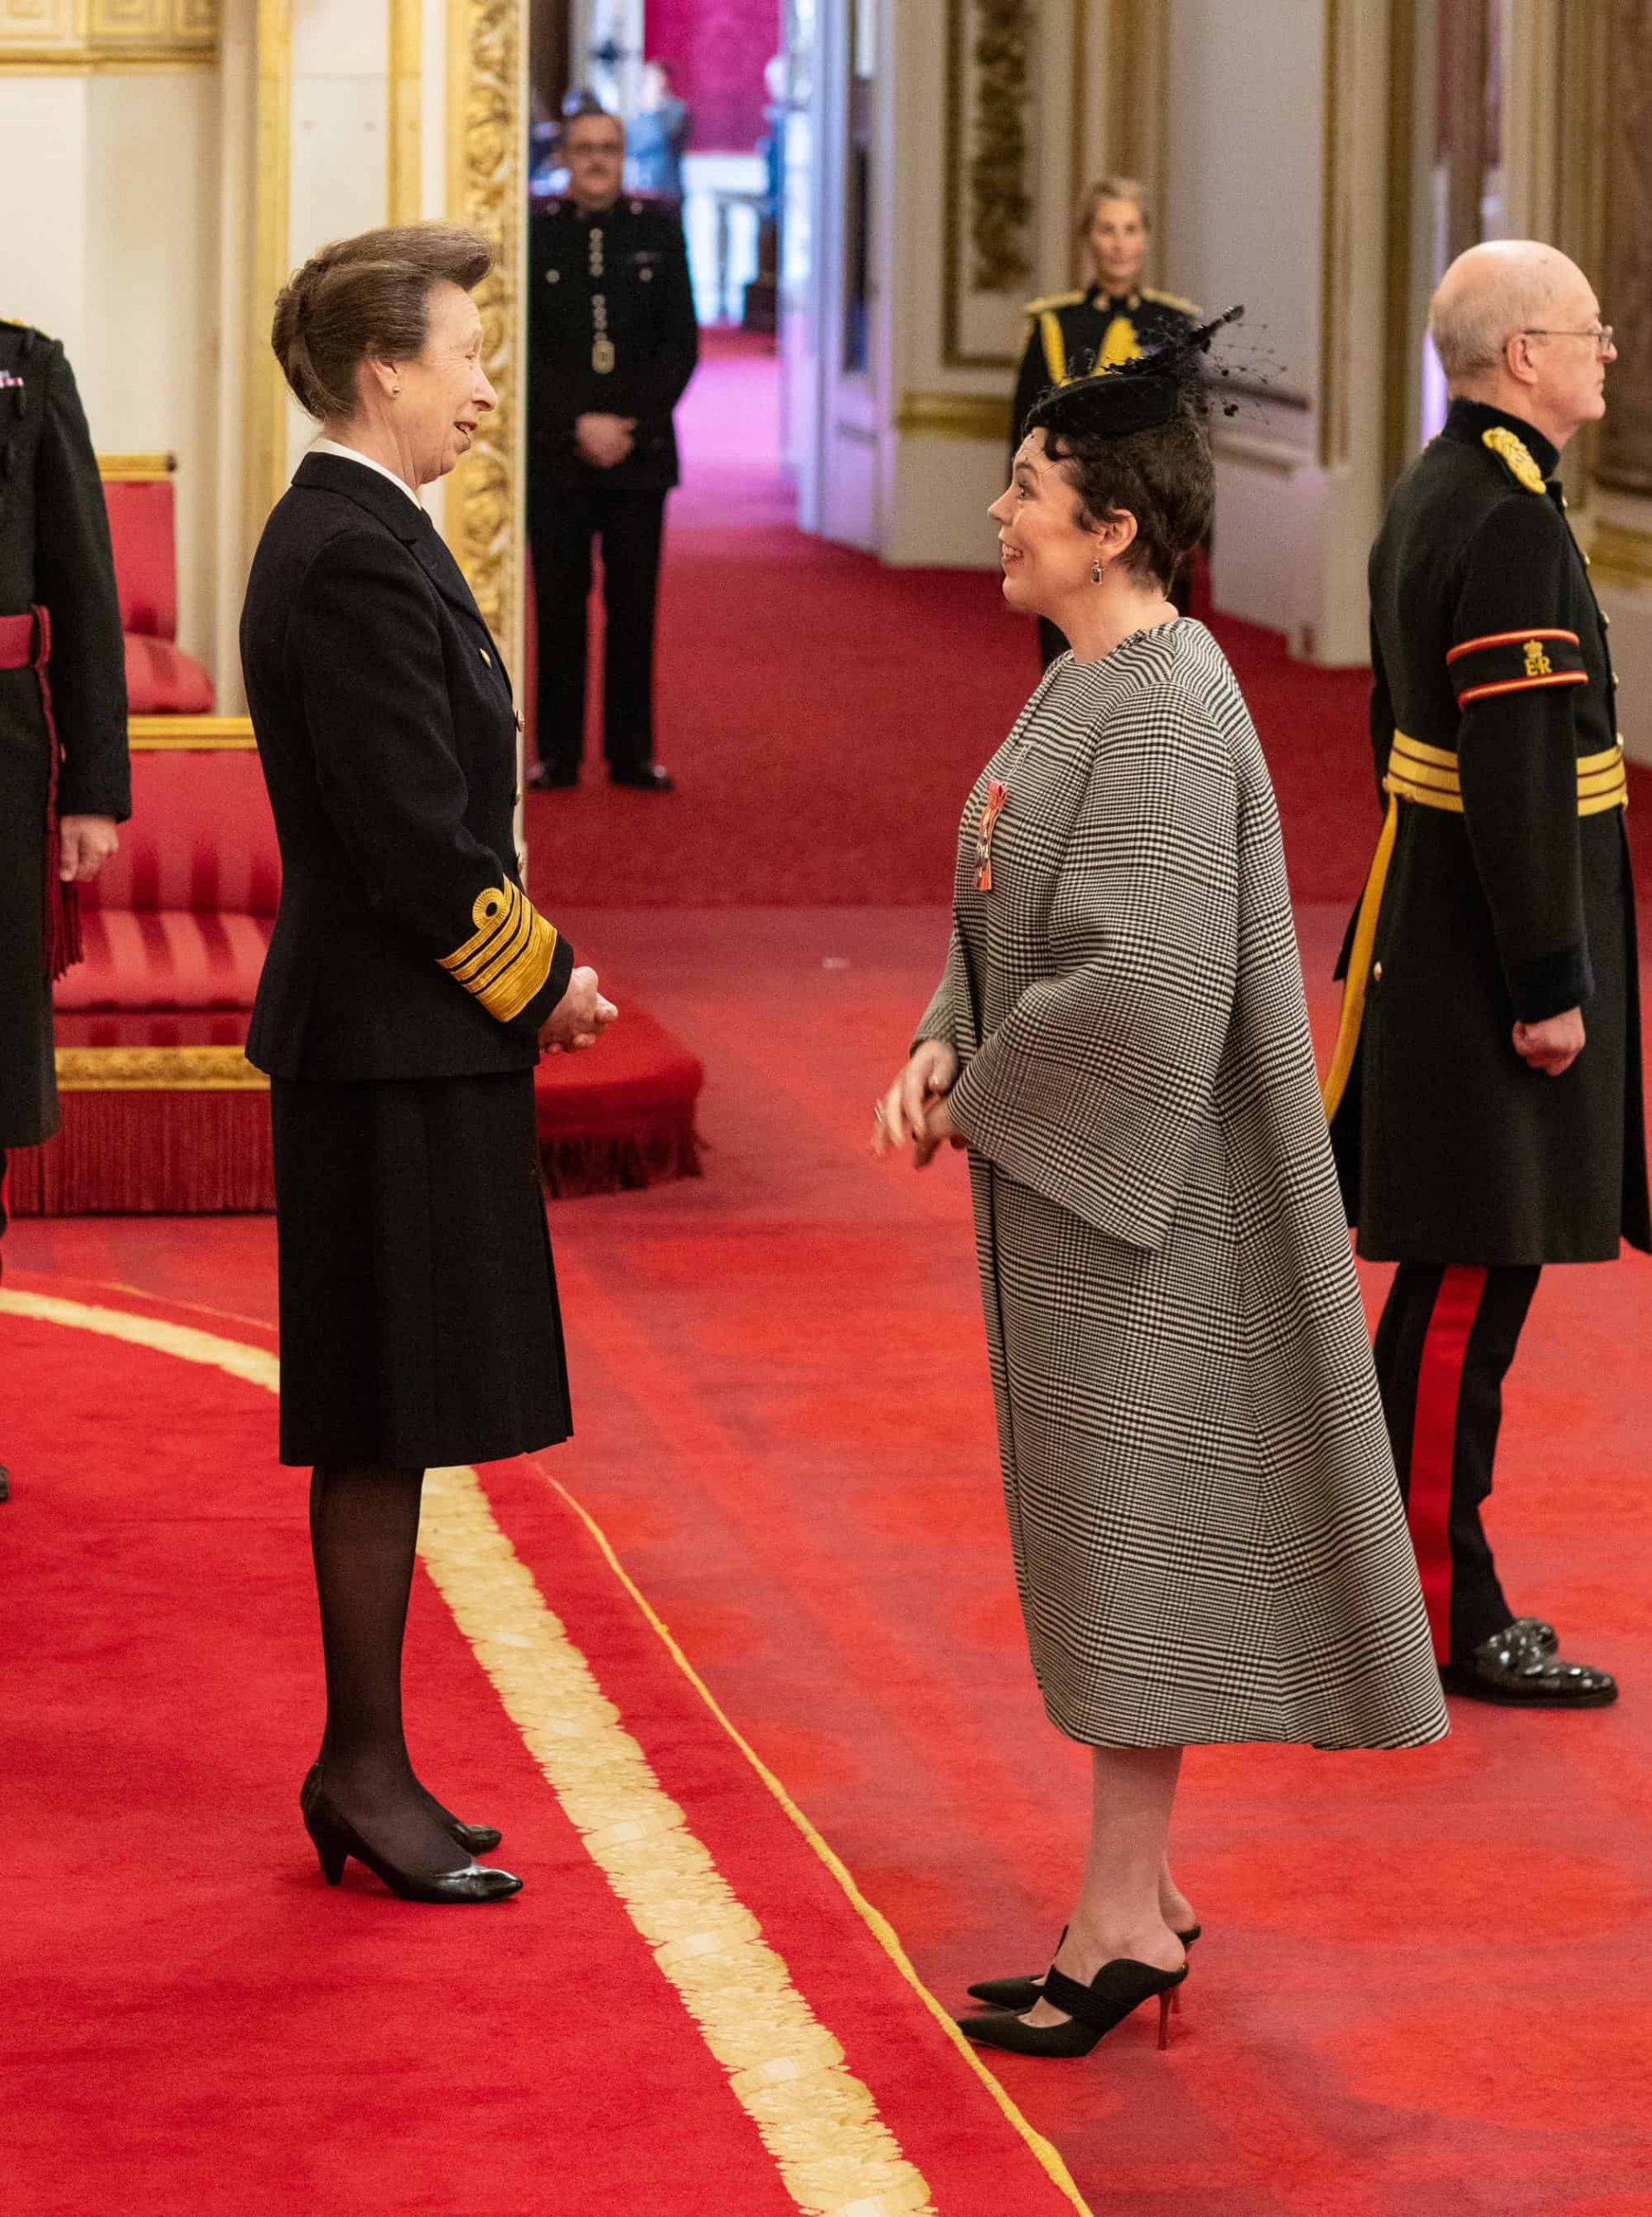 Crown star Olivia Colman misses chance to meet the Queen she plays on screen